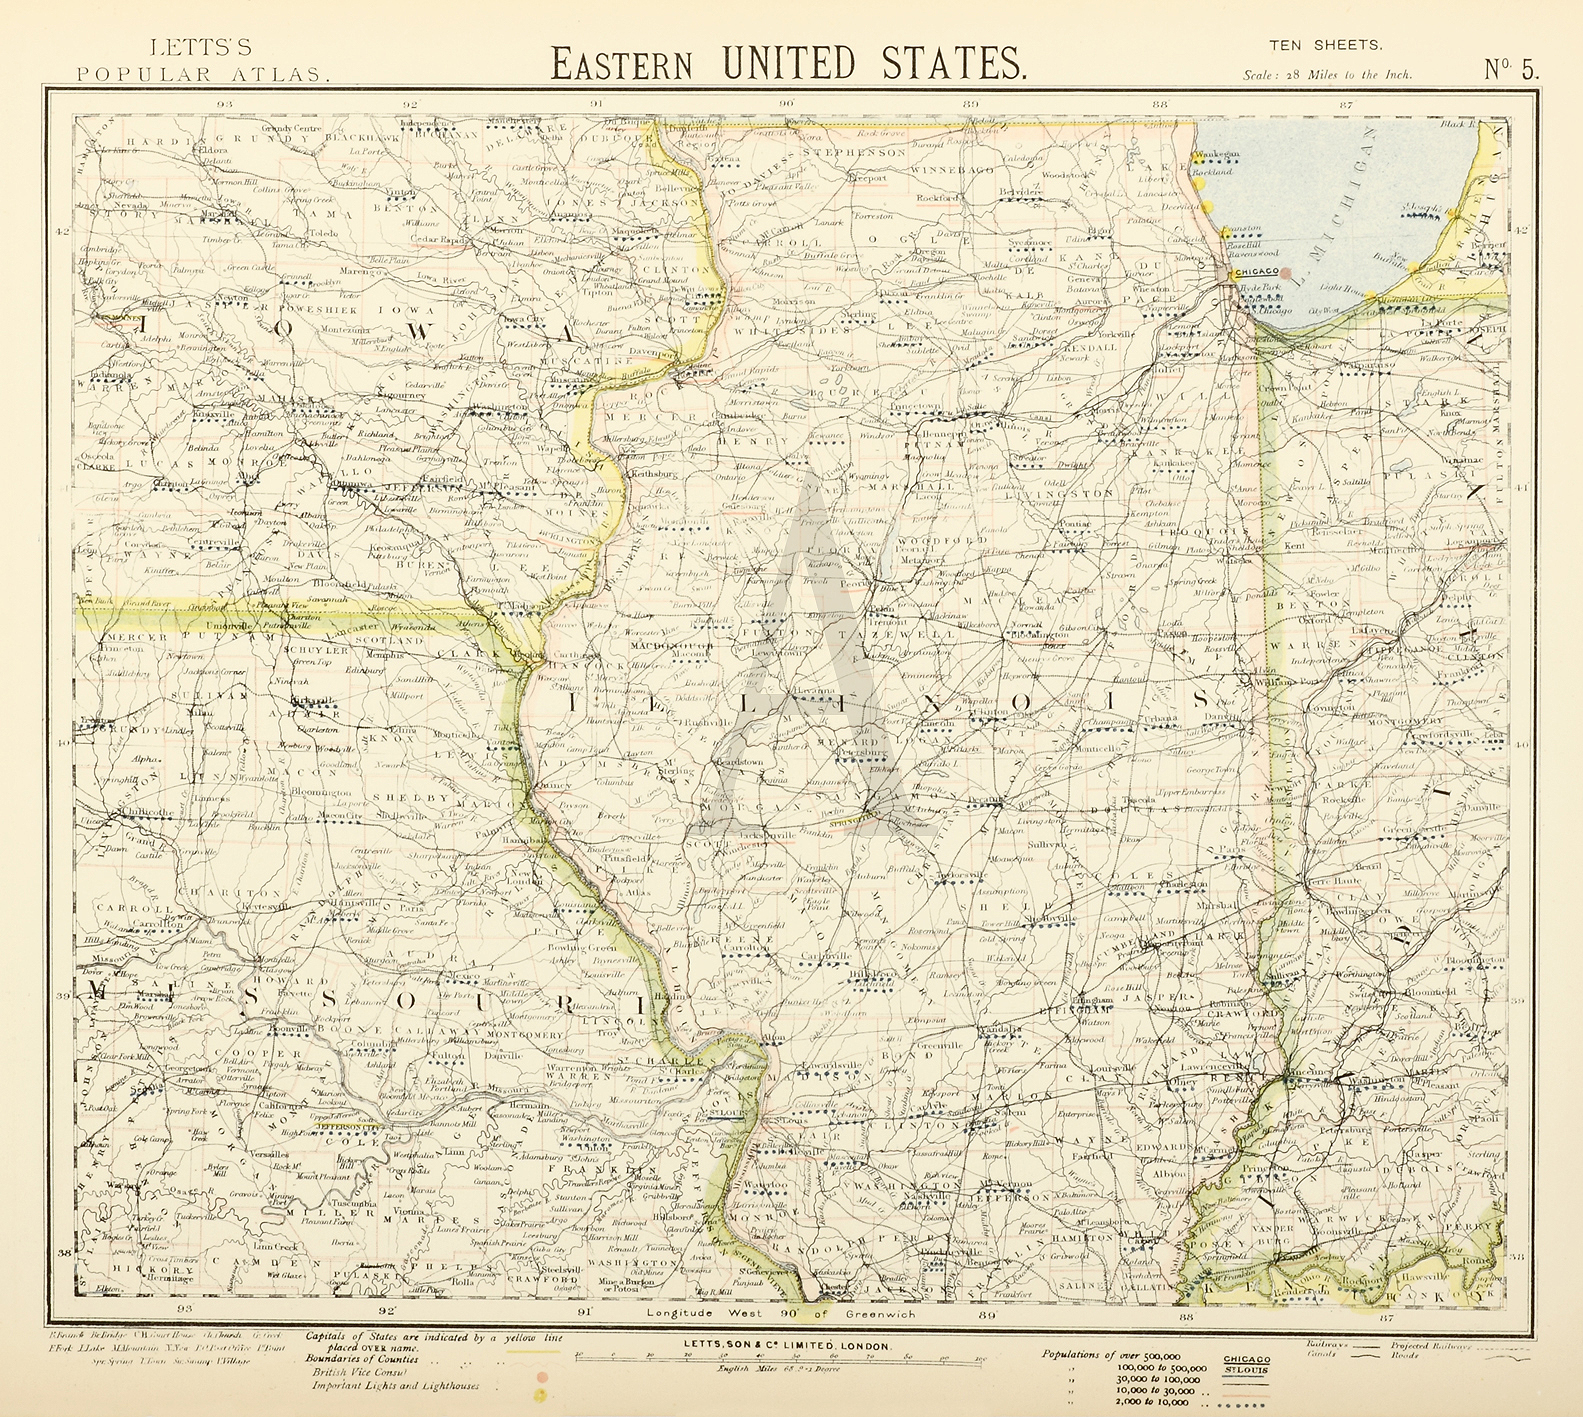 Eastern United States. No. 5. - Antique Print from 1881